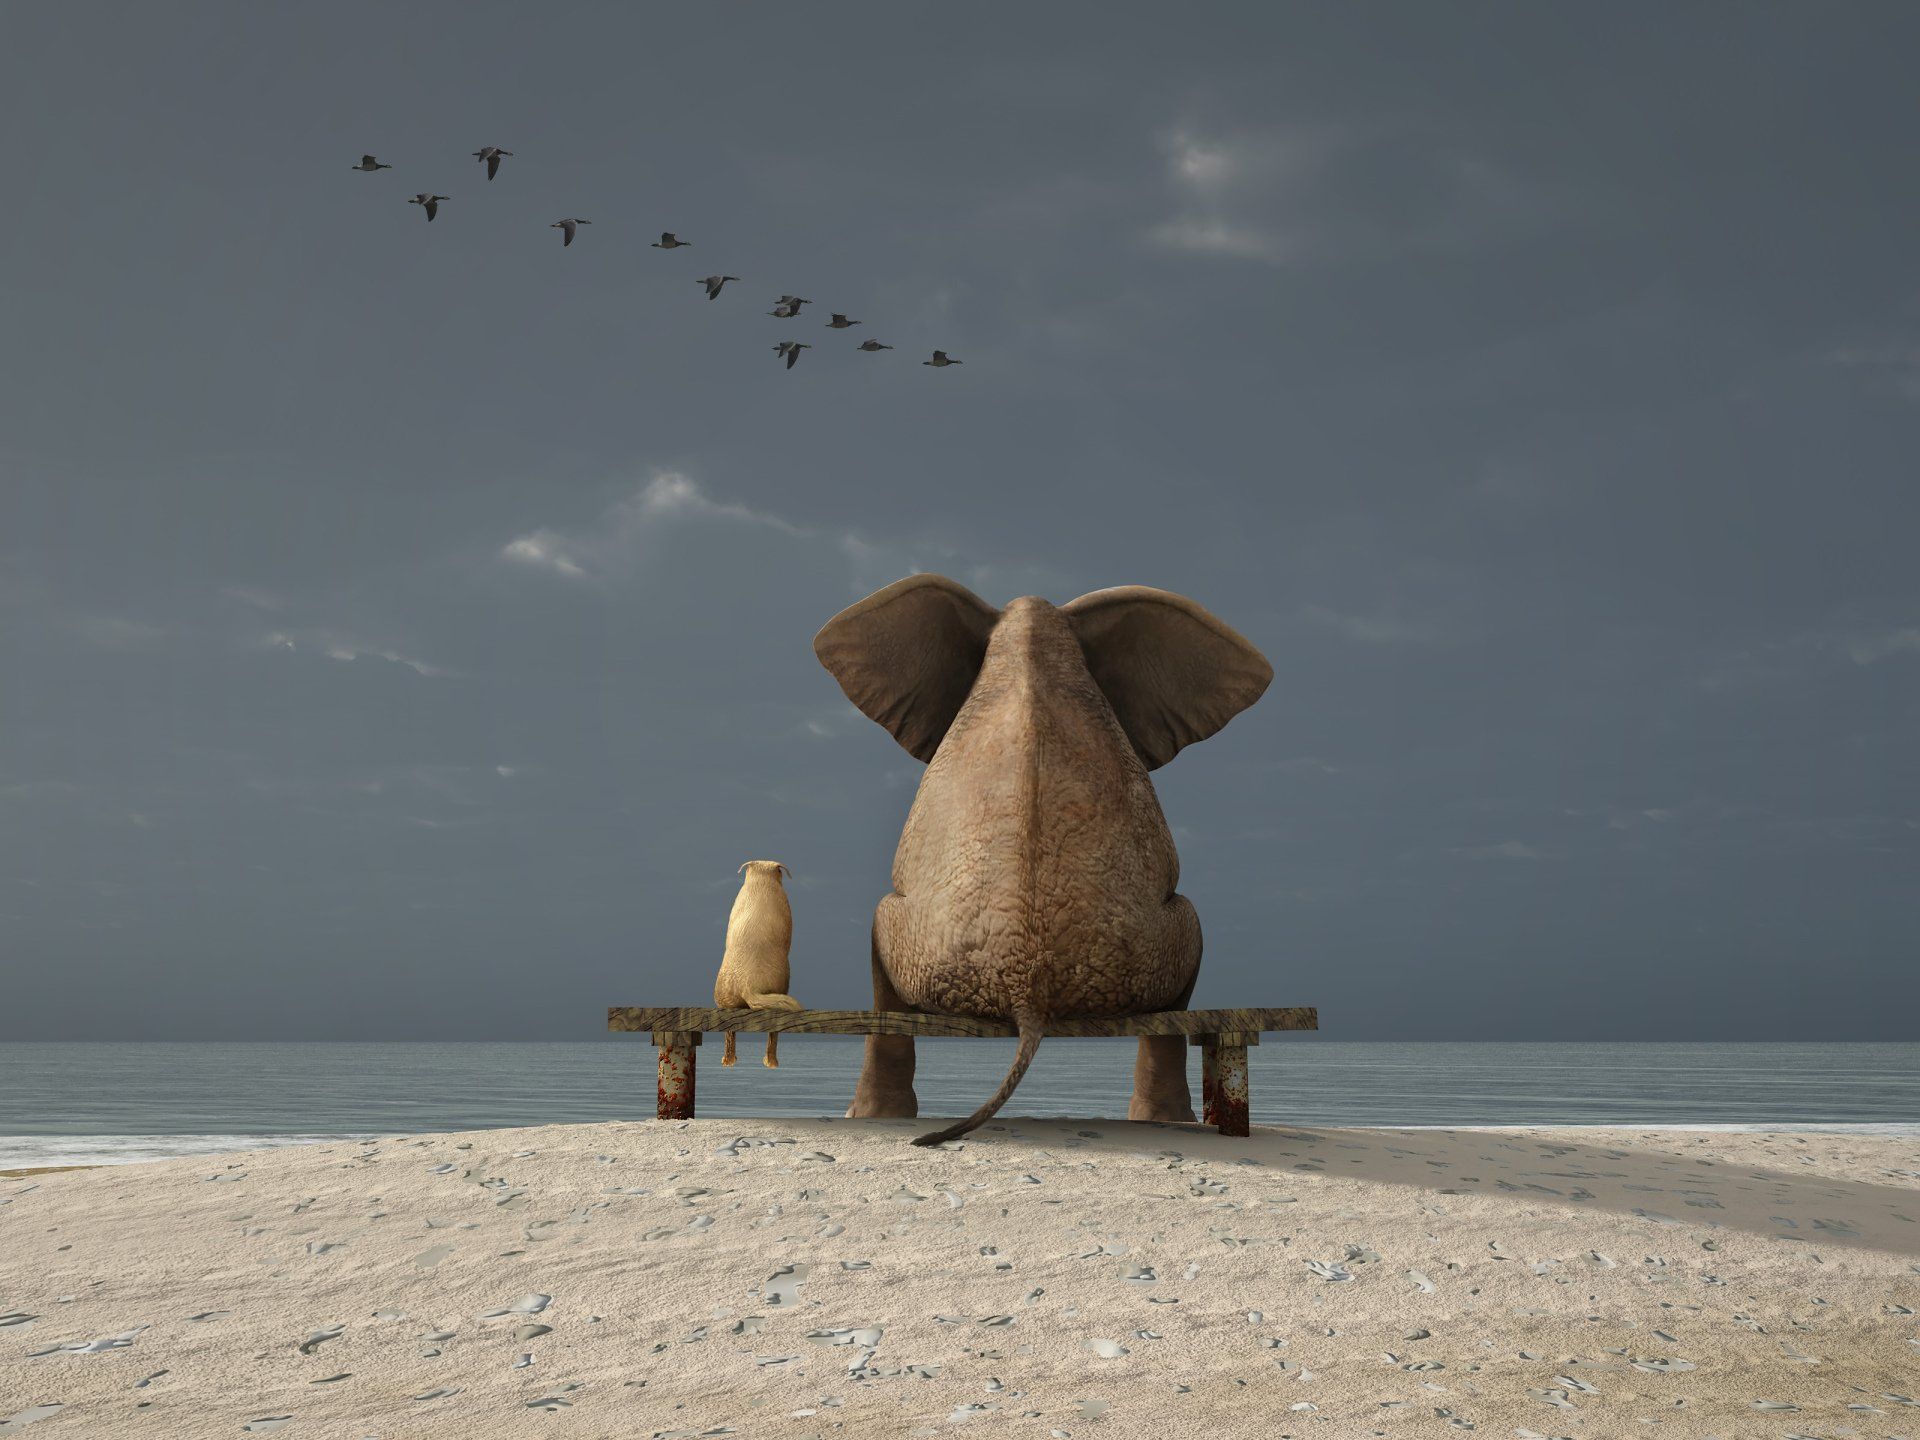 an elephant and a bird are sitting on a bench on the beach .